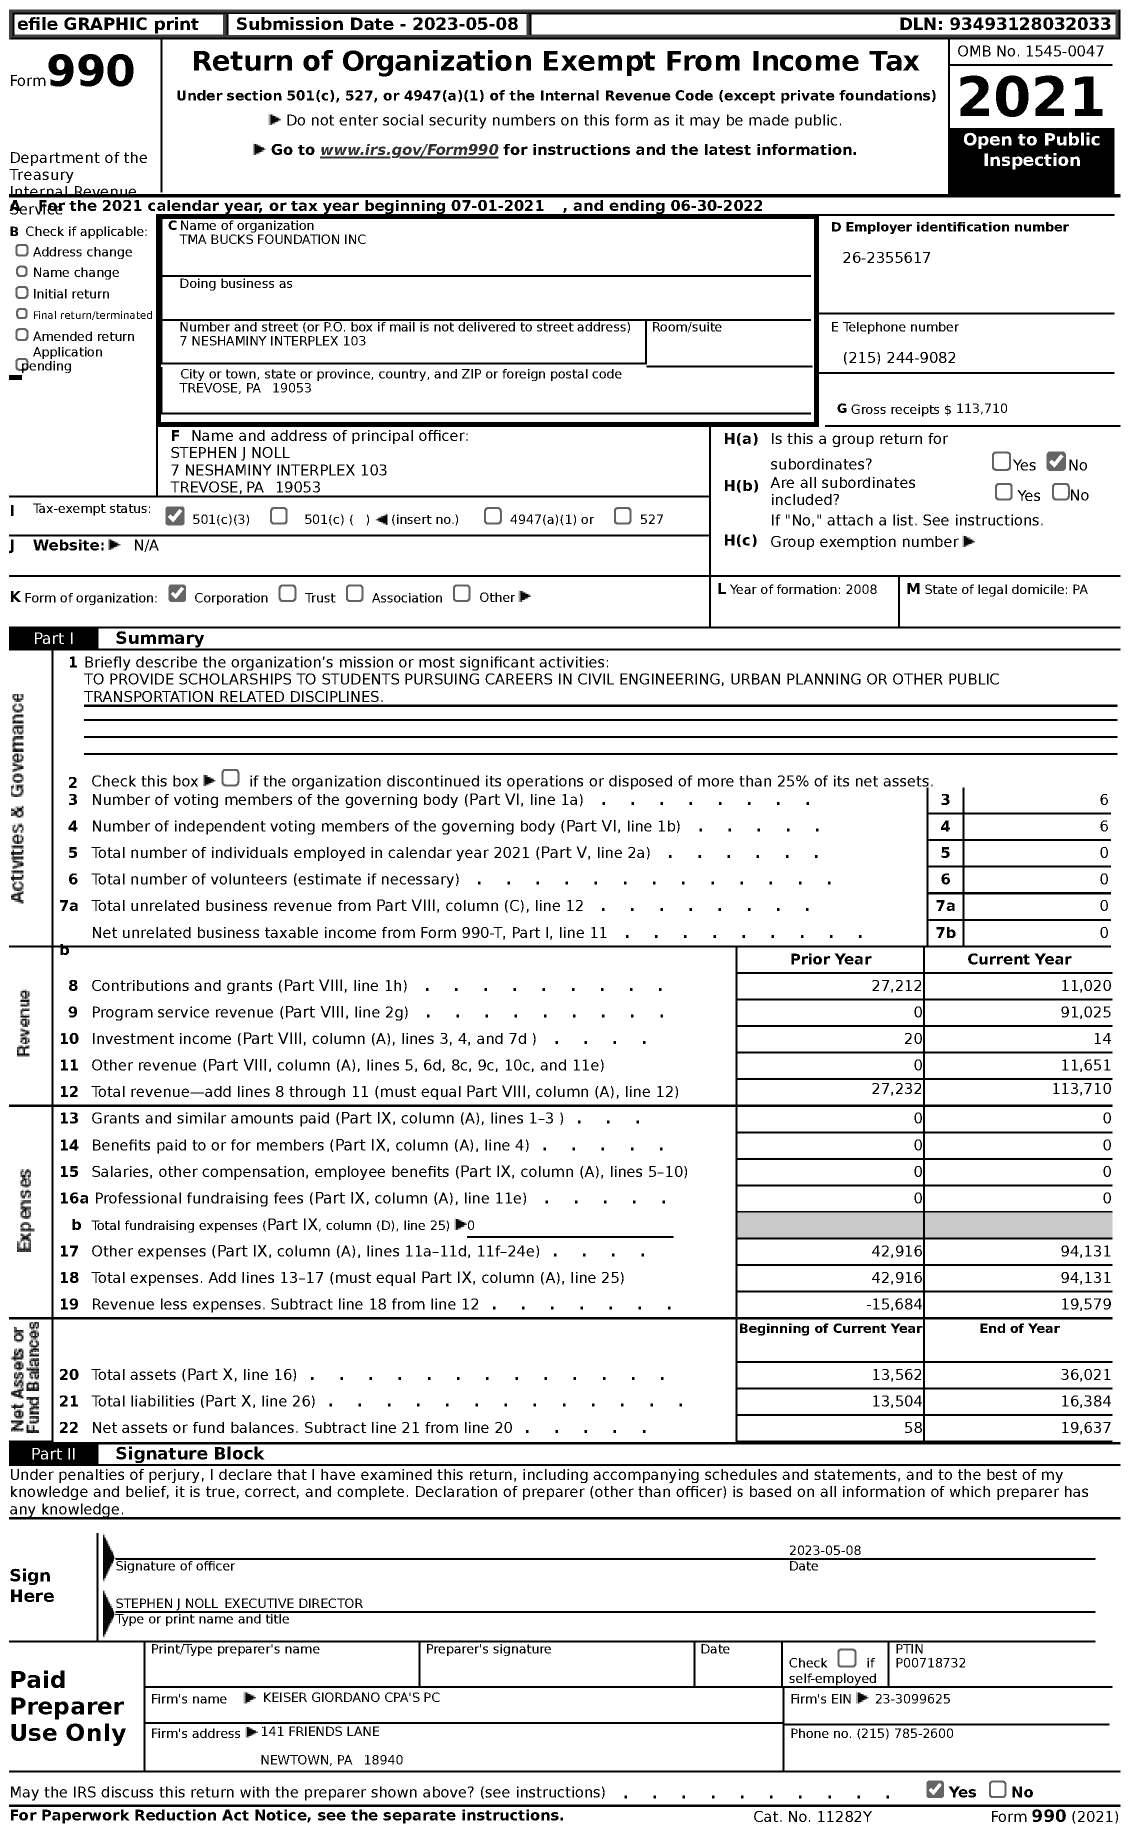 Image of first page of 2021 Form 990 for Tma Bucks Foundation